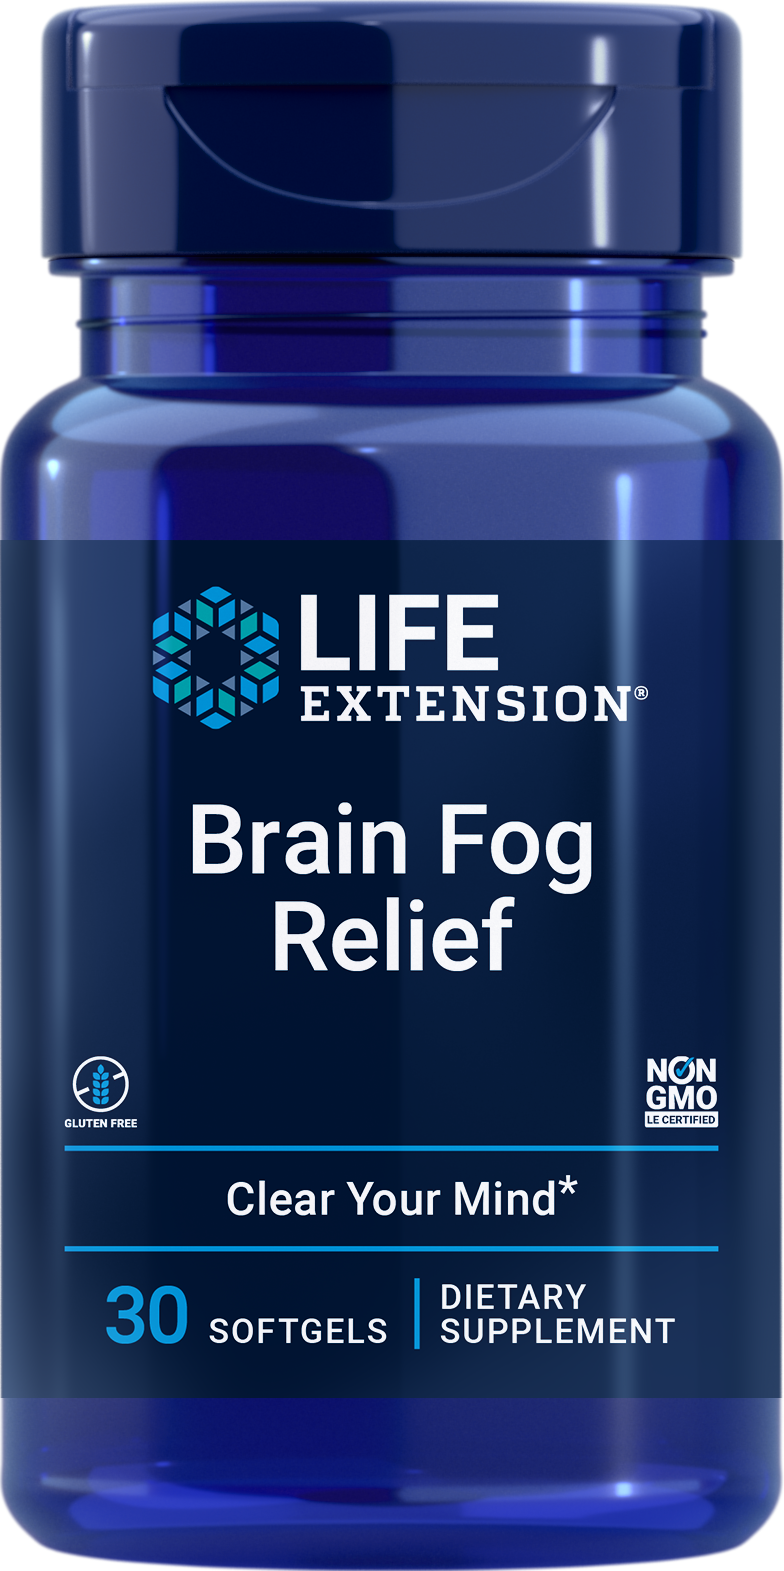 Life Extension Brain Fog Relief, 30 softgels to boost cognitive performance and restore mental clarity and attention.